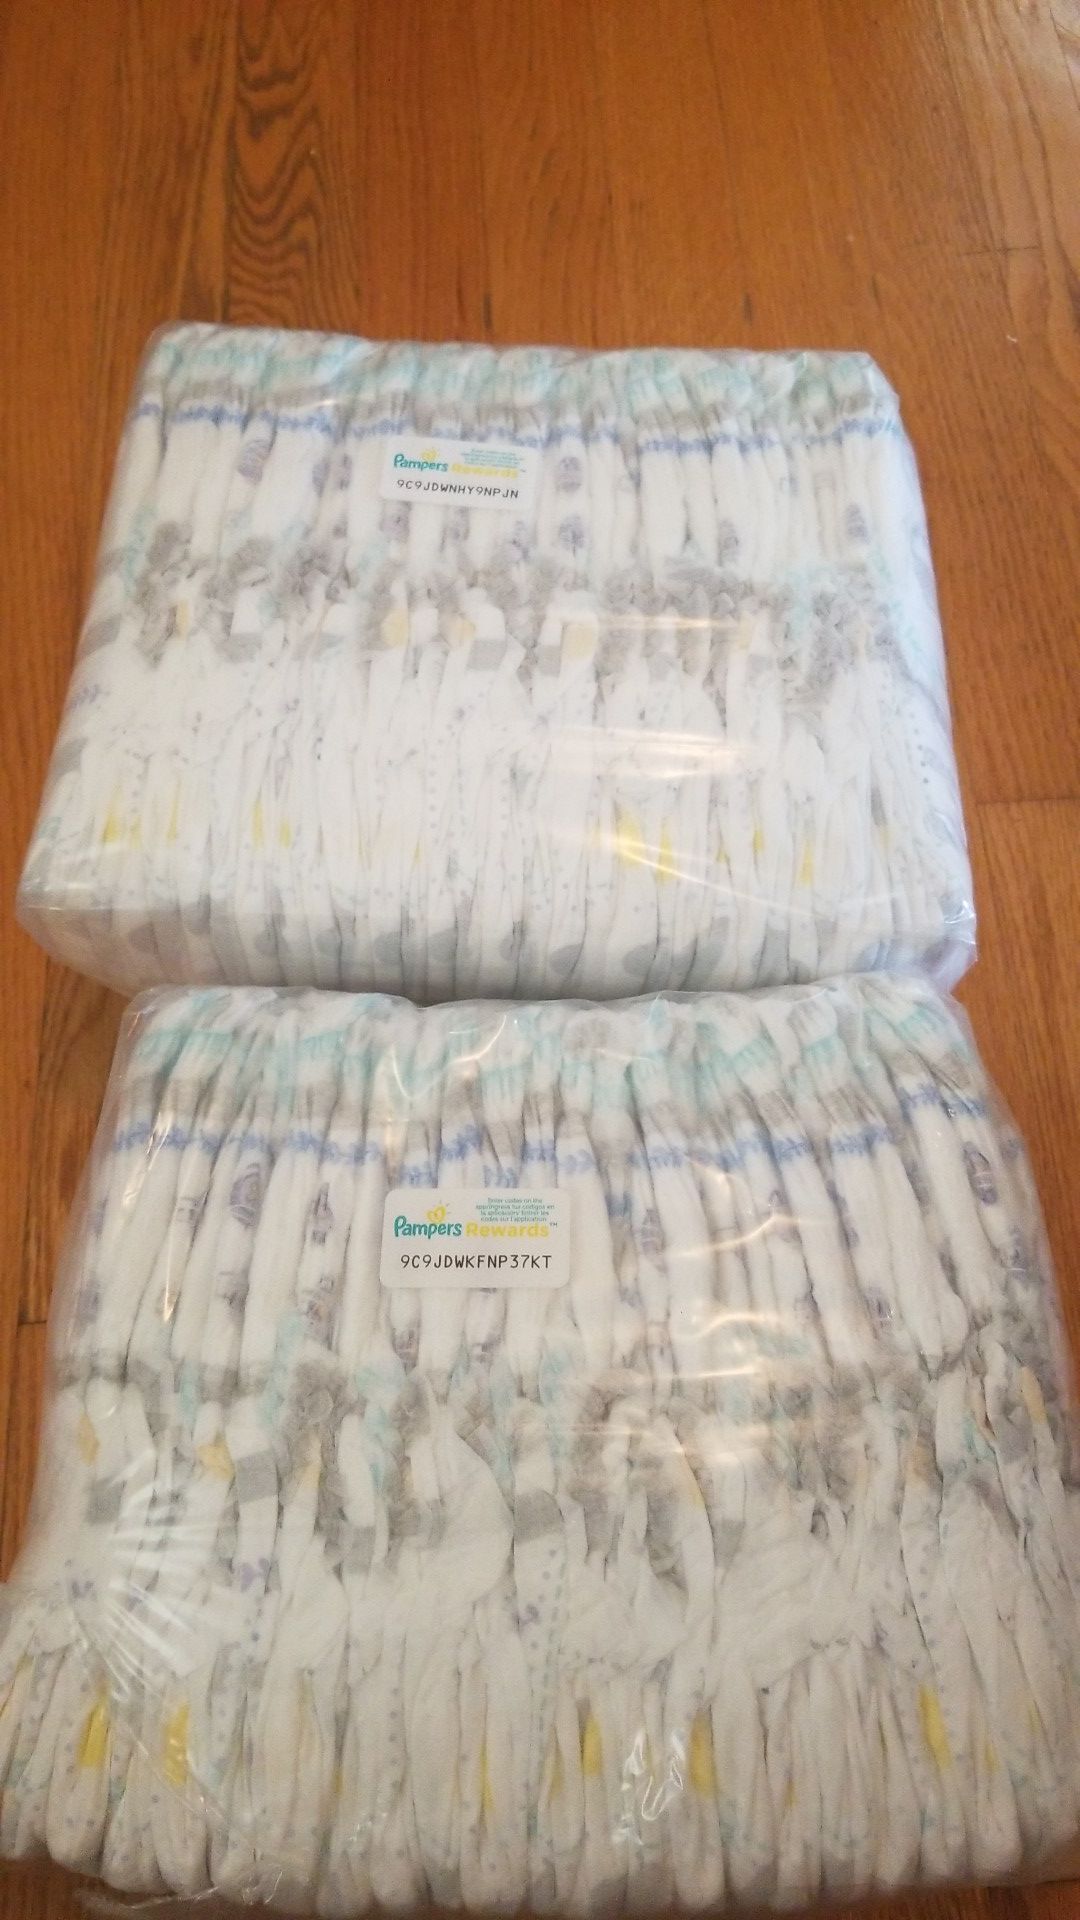 Pampers pull up size 4